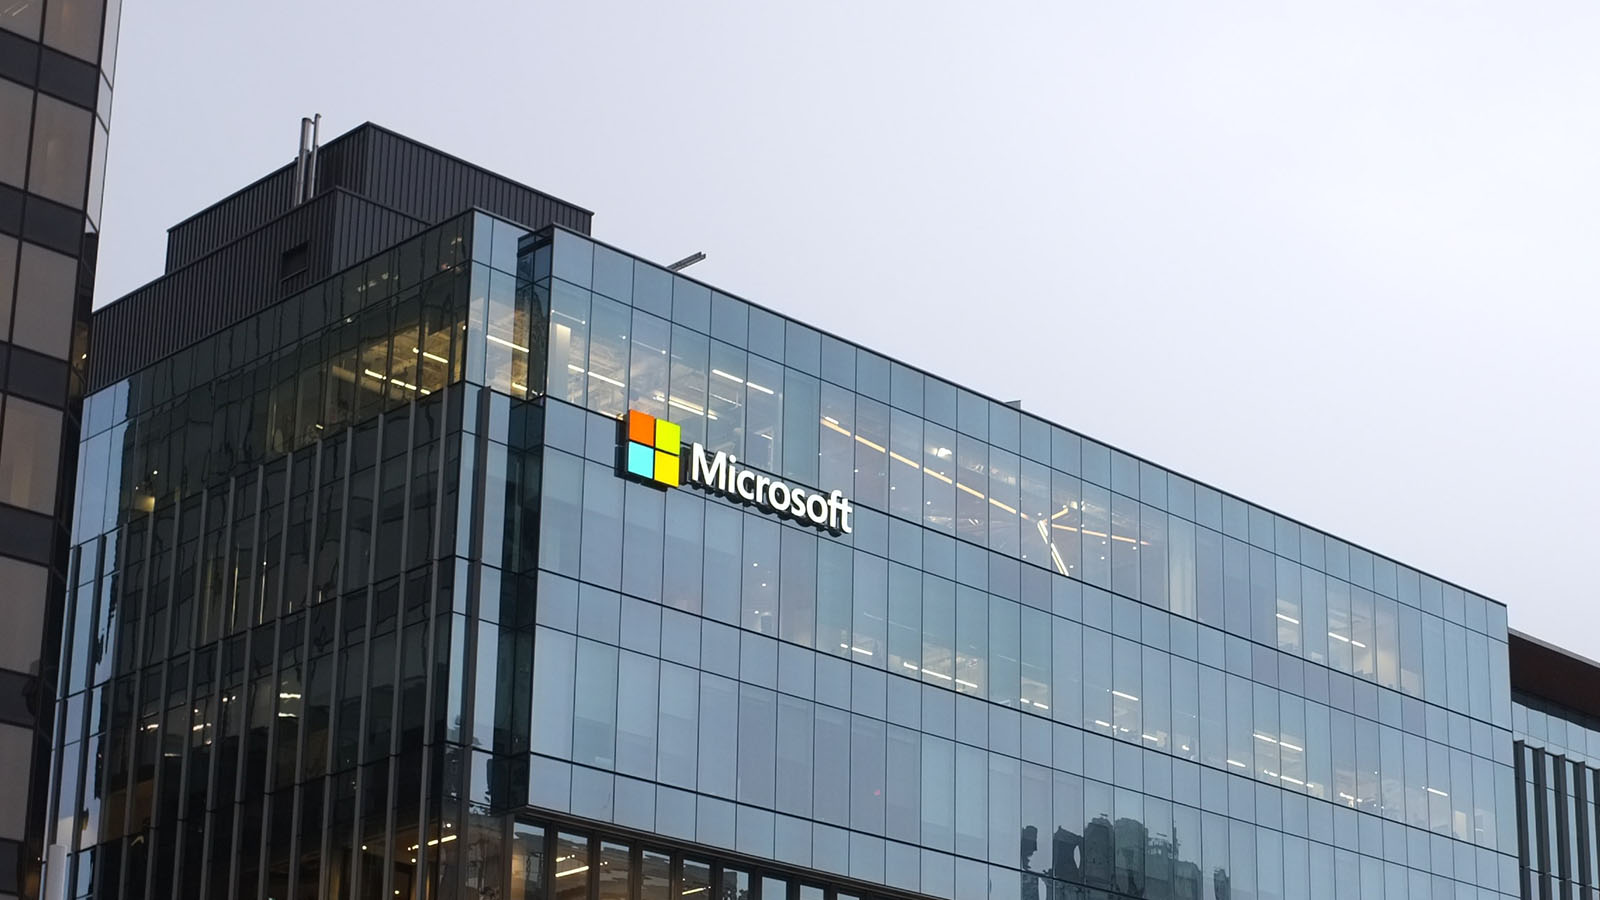 Our partnership with Microsoft